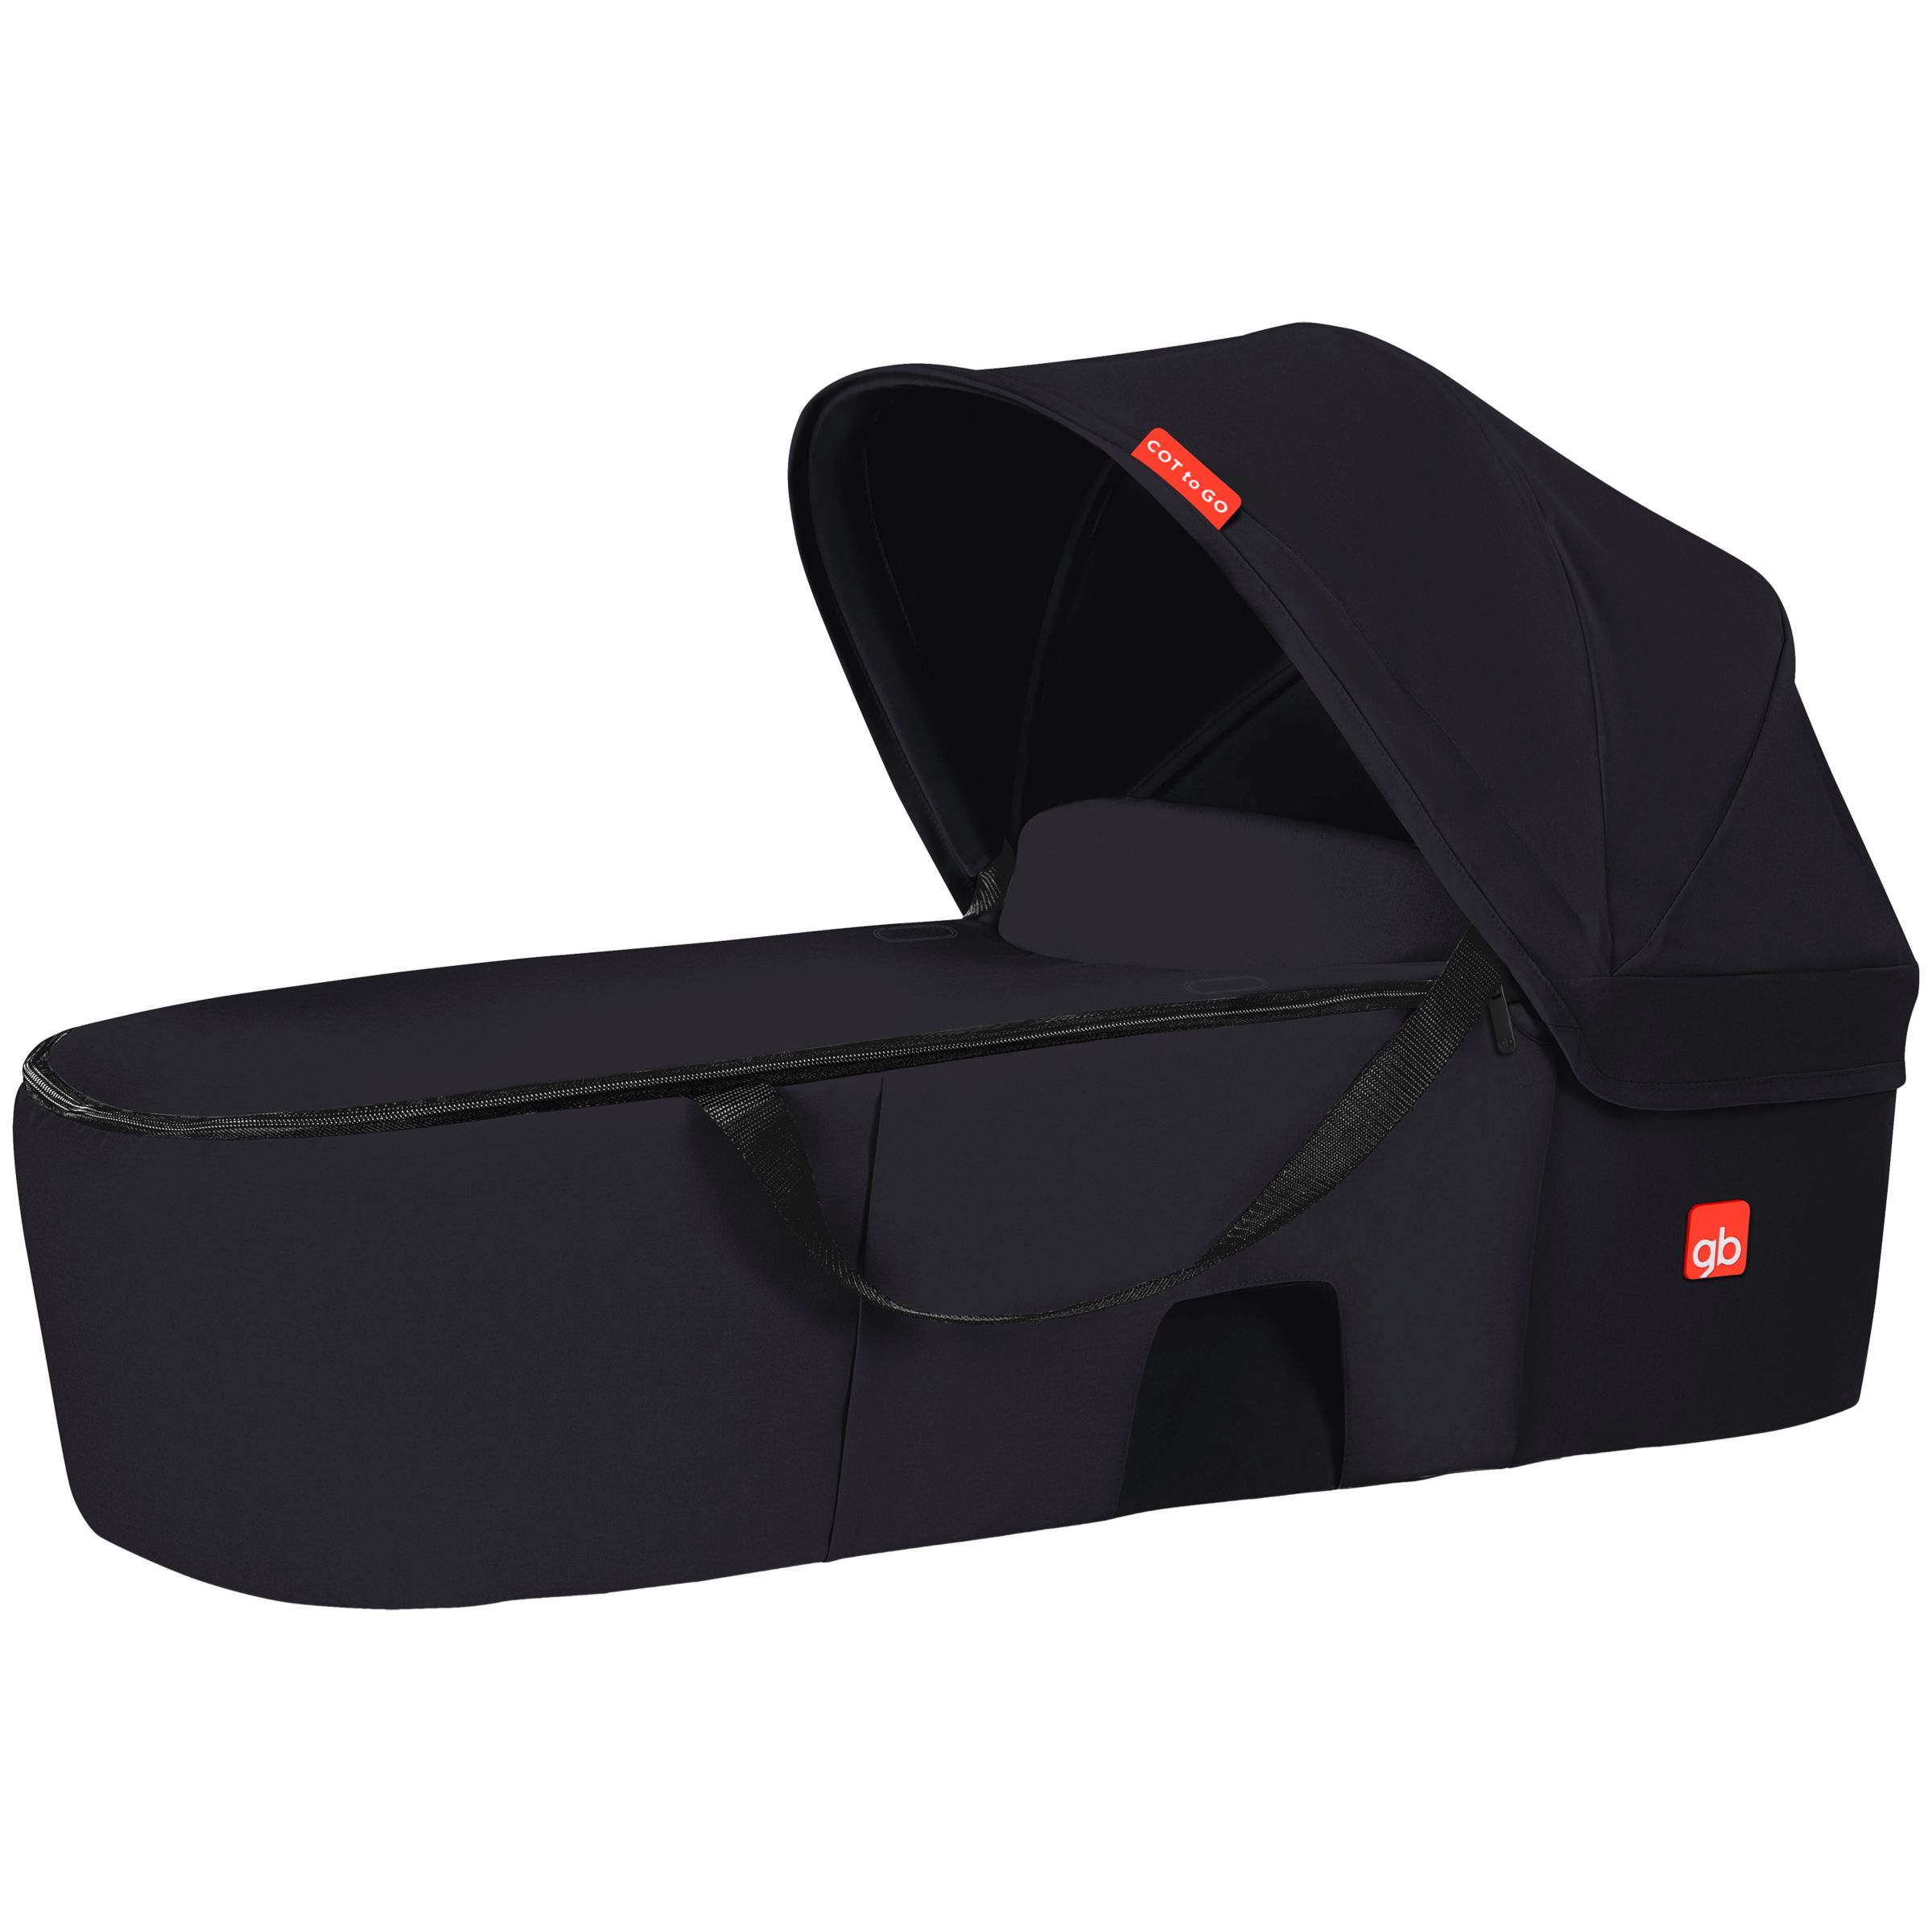 Image of GB Cot To Go Carrycot Satin Black